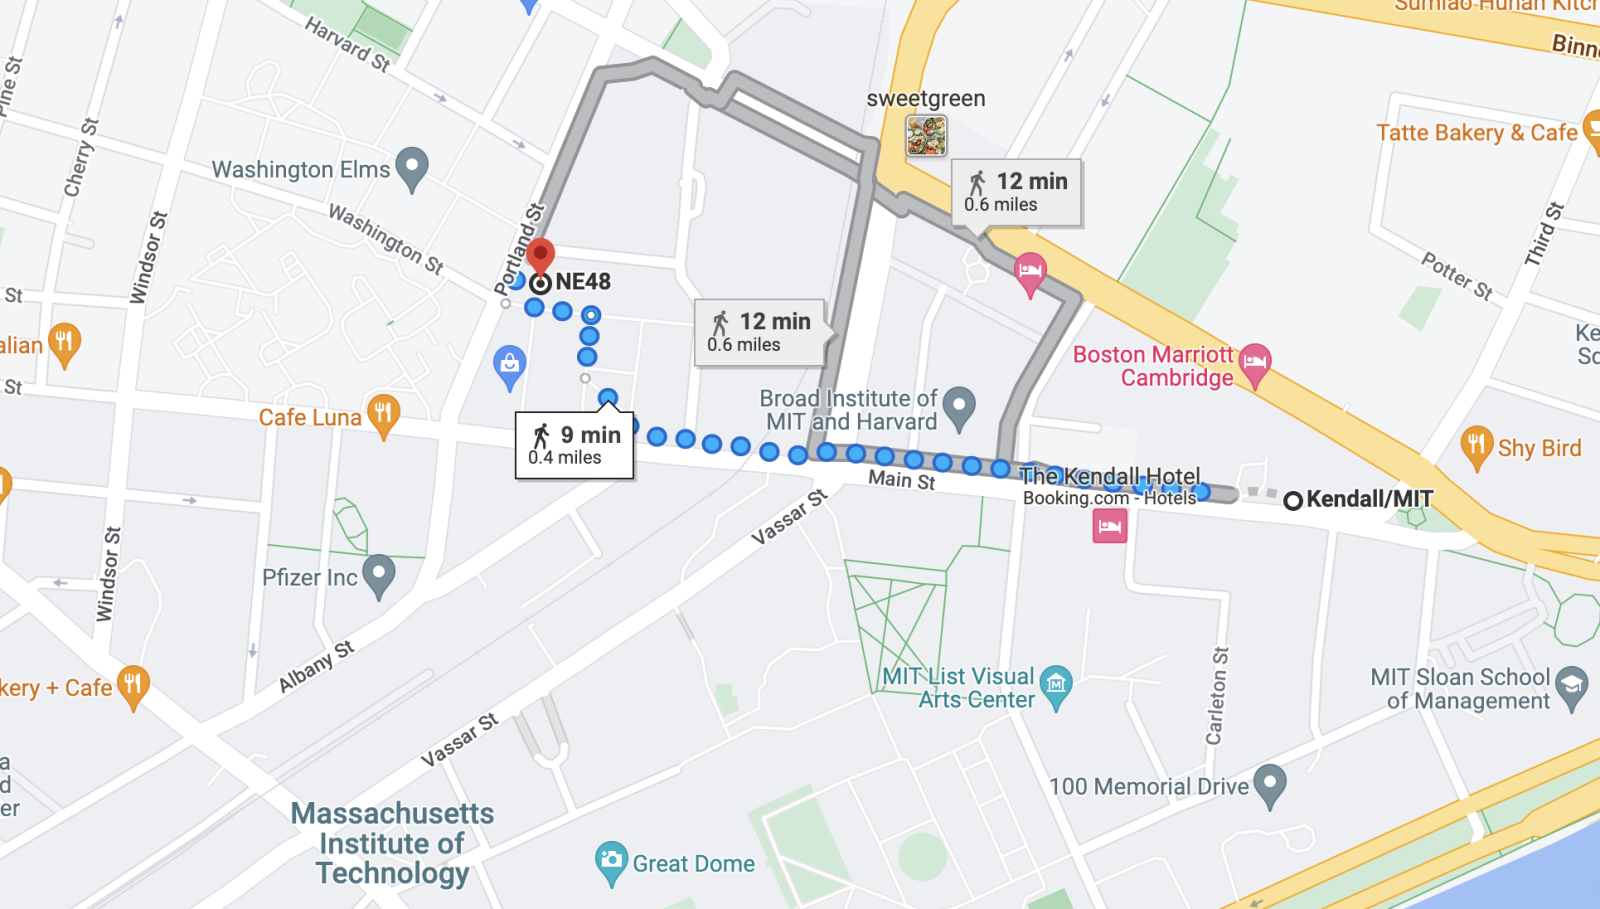 Google Maps rendering of walking directions from Kendall Sq to MassBioHub in Cambridge, MA